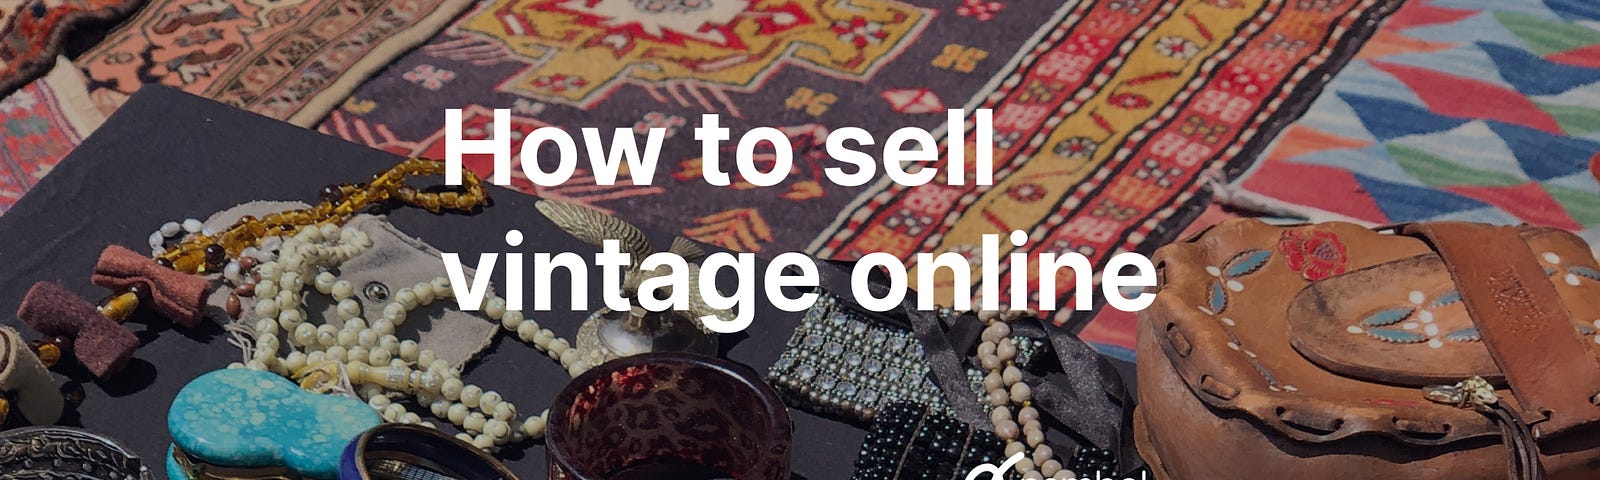 how to sell vintage online